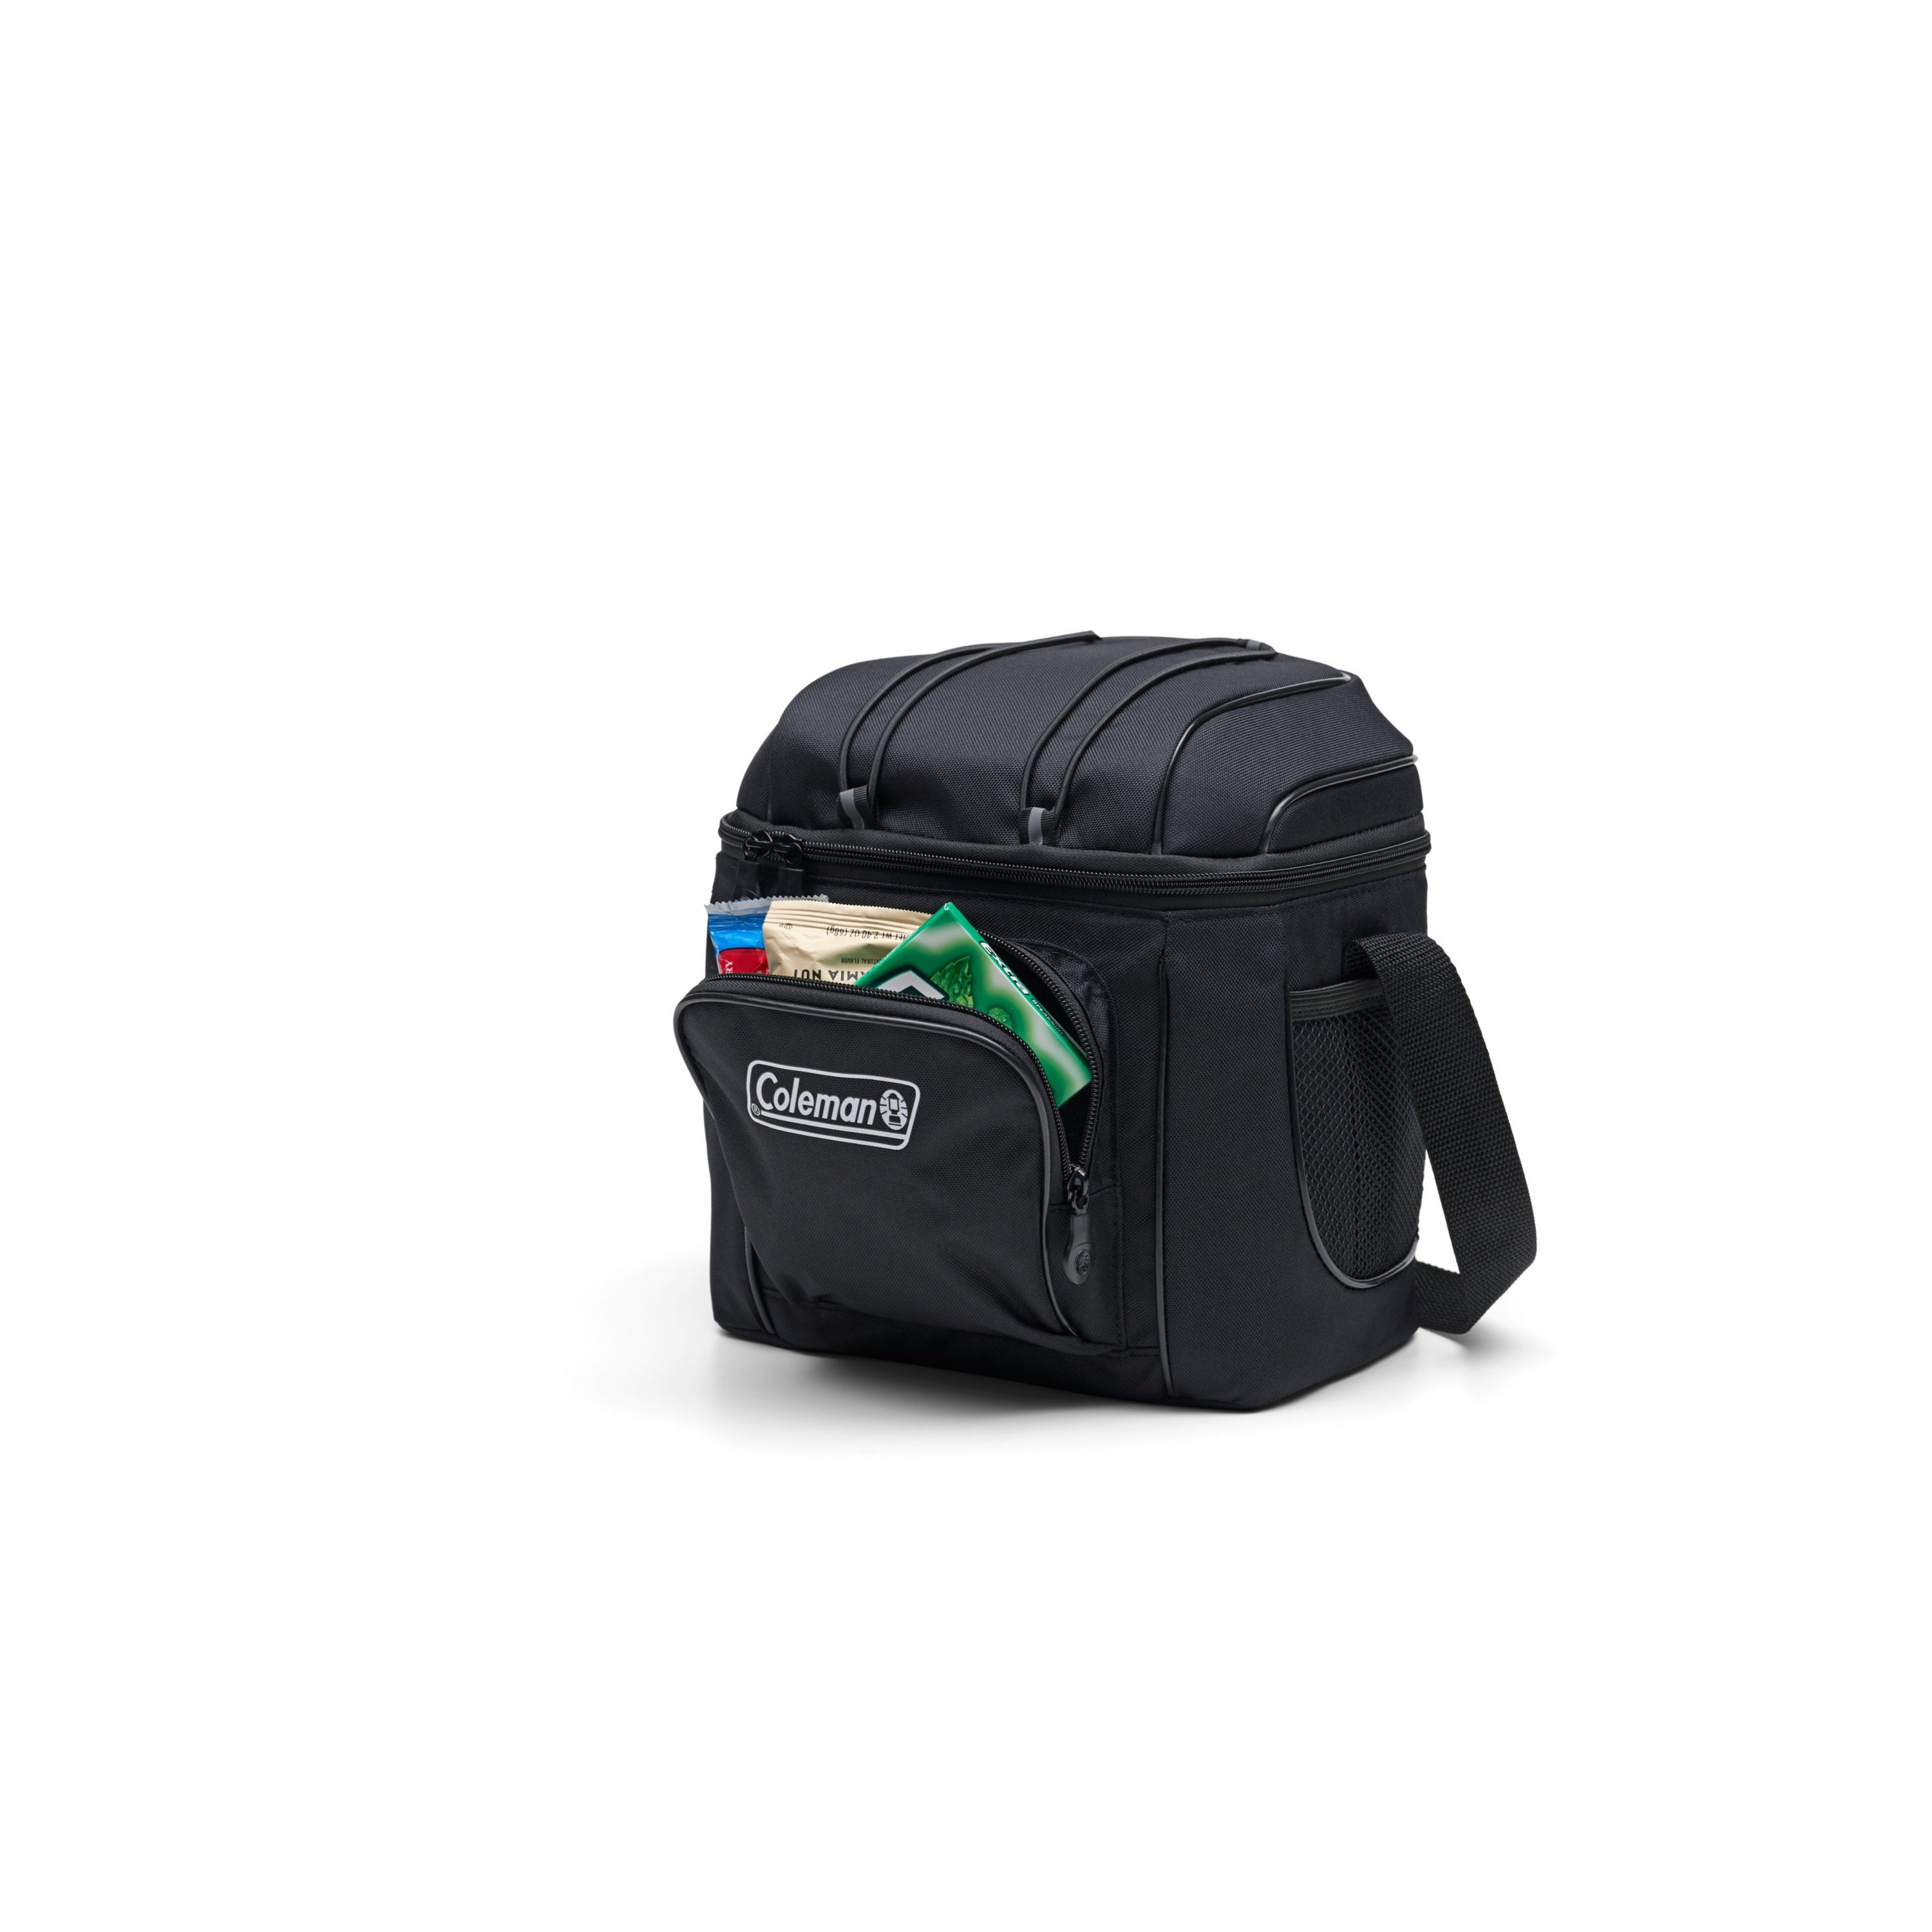 Coleman CHILLER 9-cans Insulated Soft Cooler Bag, Black - image 5 of 5